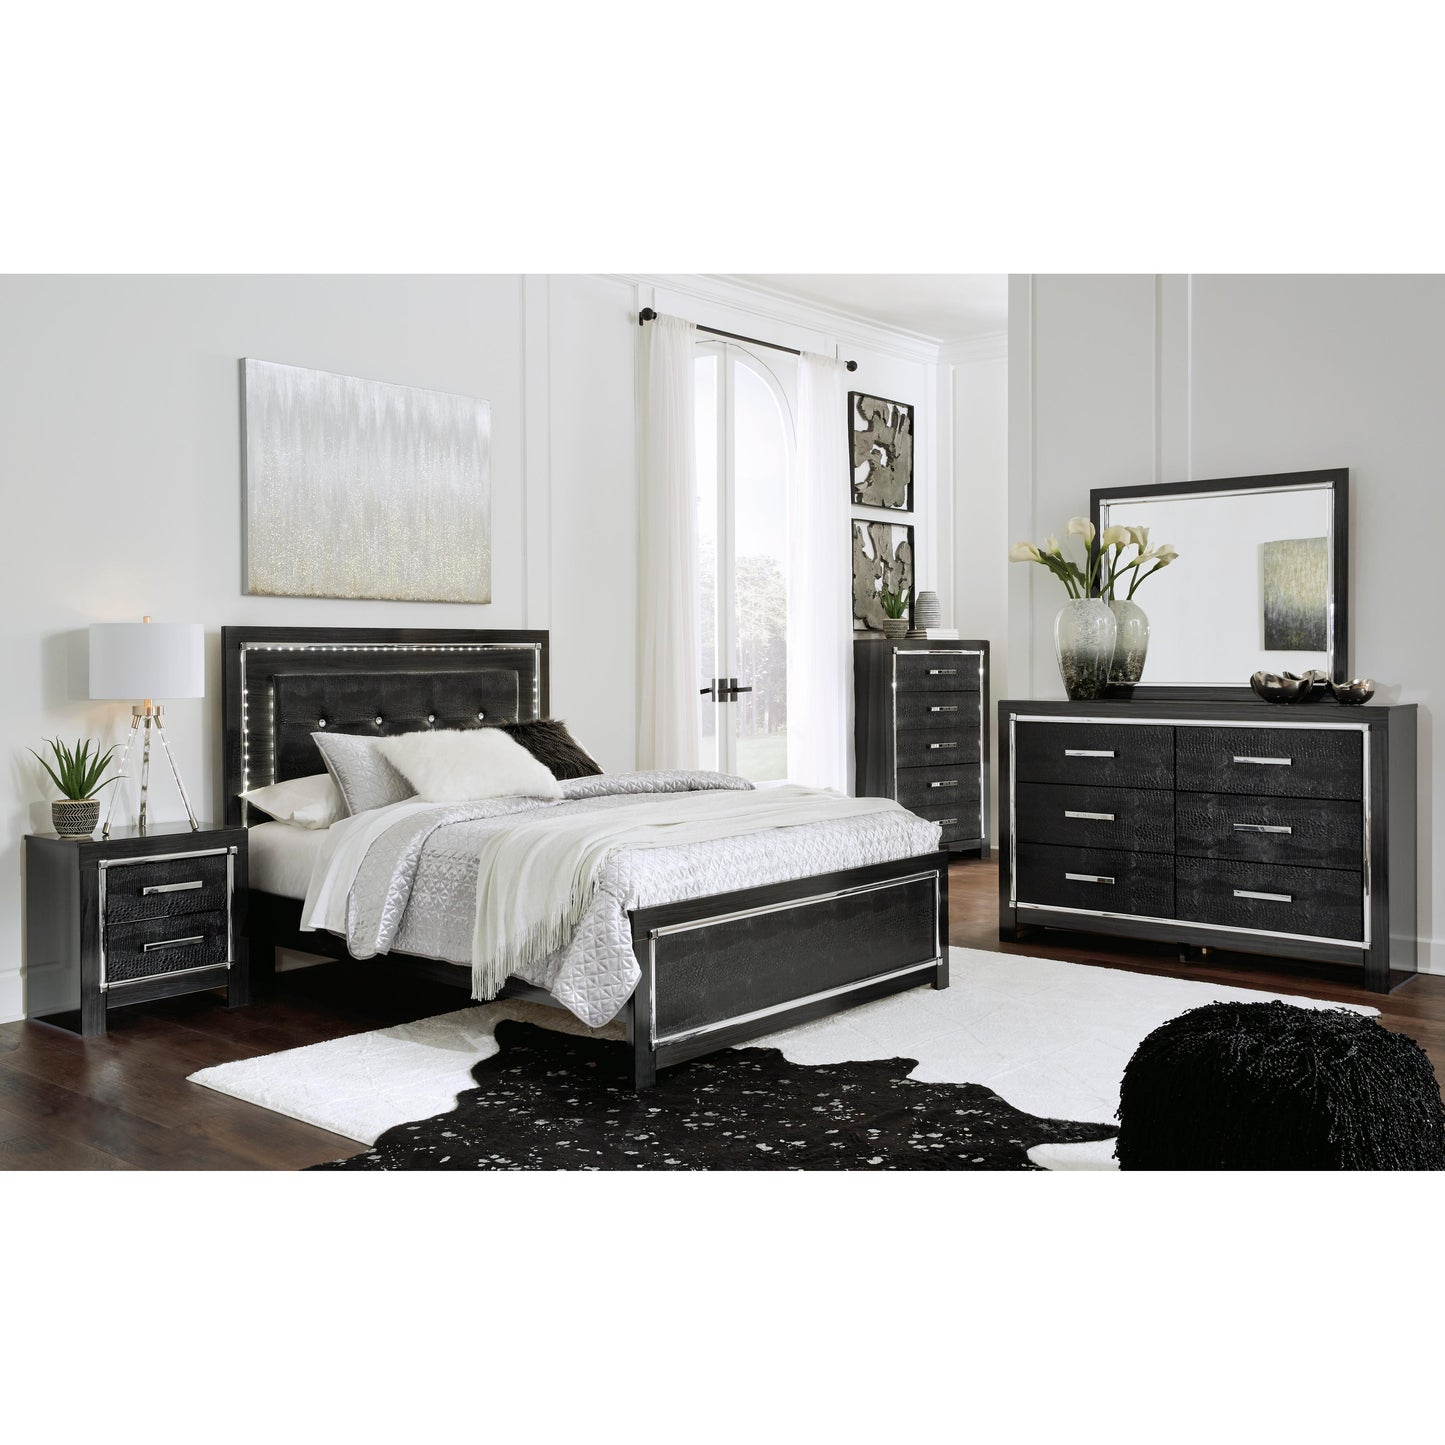 Signature Design by Ashley Kaydell B1420B22 6 pc Queen Panel Bedroom Set IMAGE 1